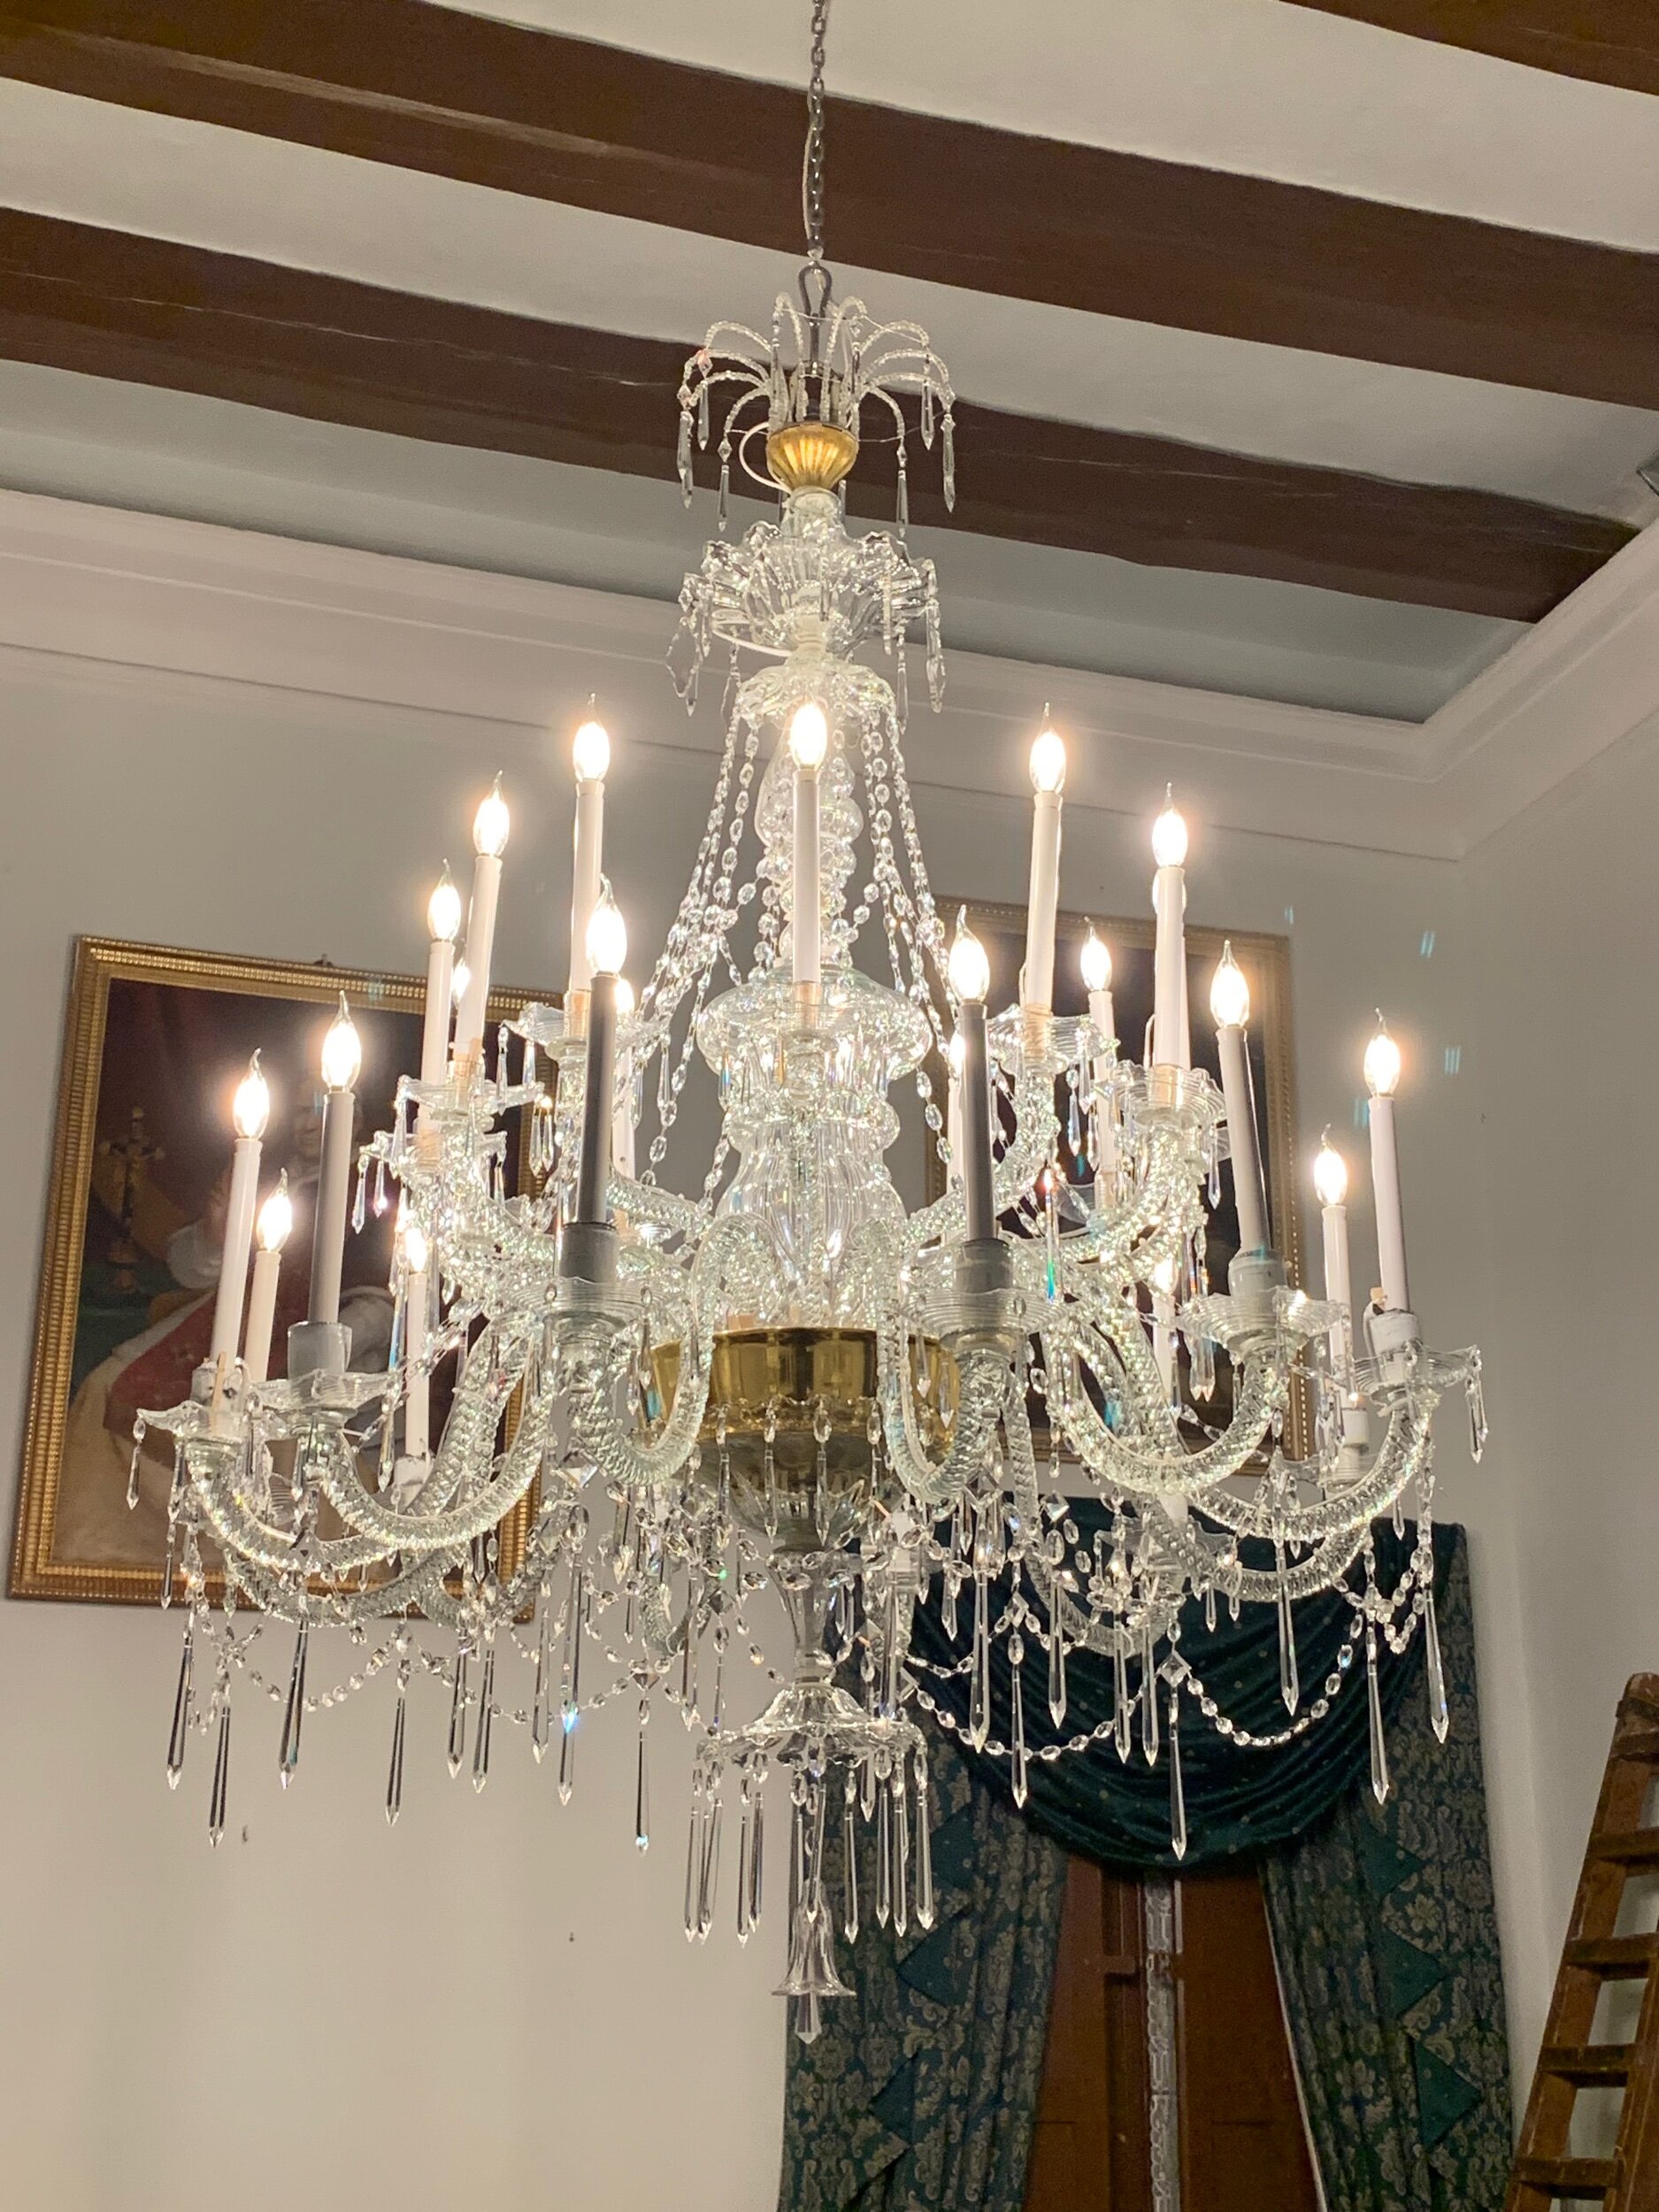 Full view of chandelier after restoration